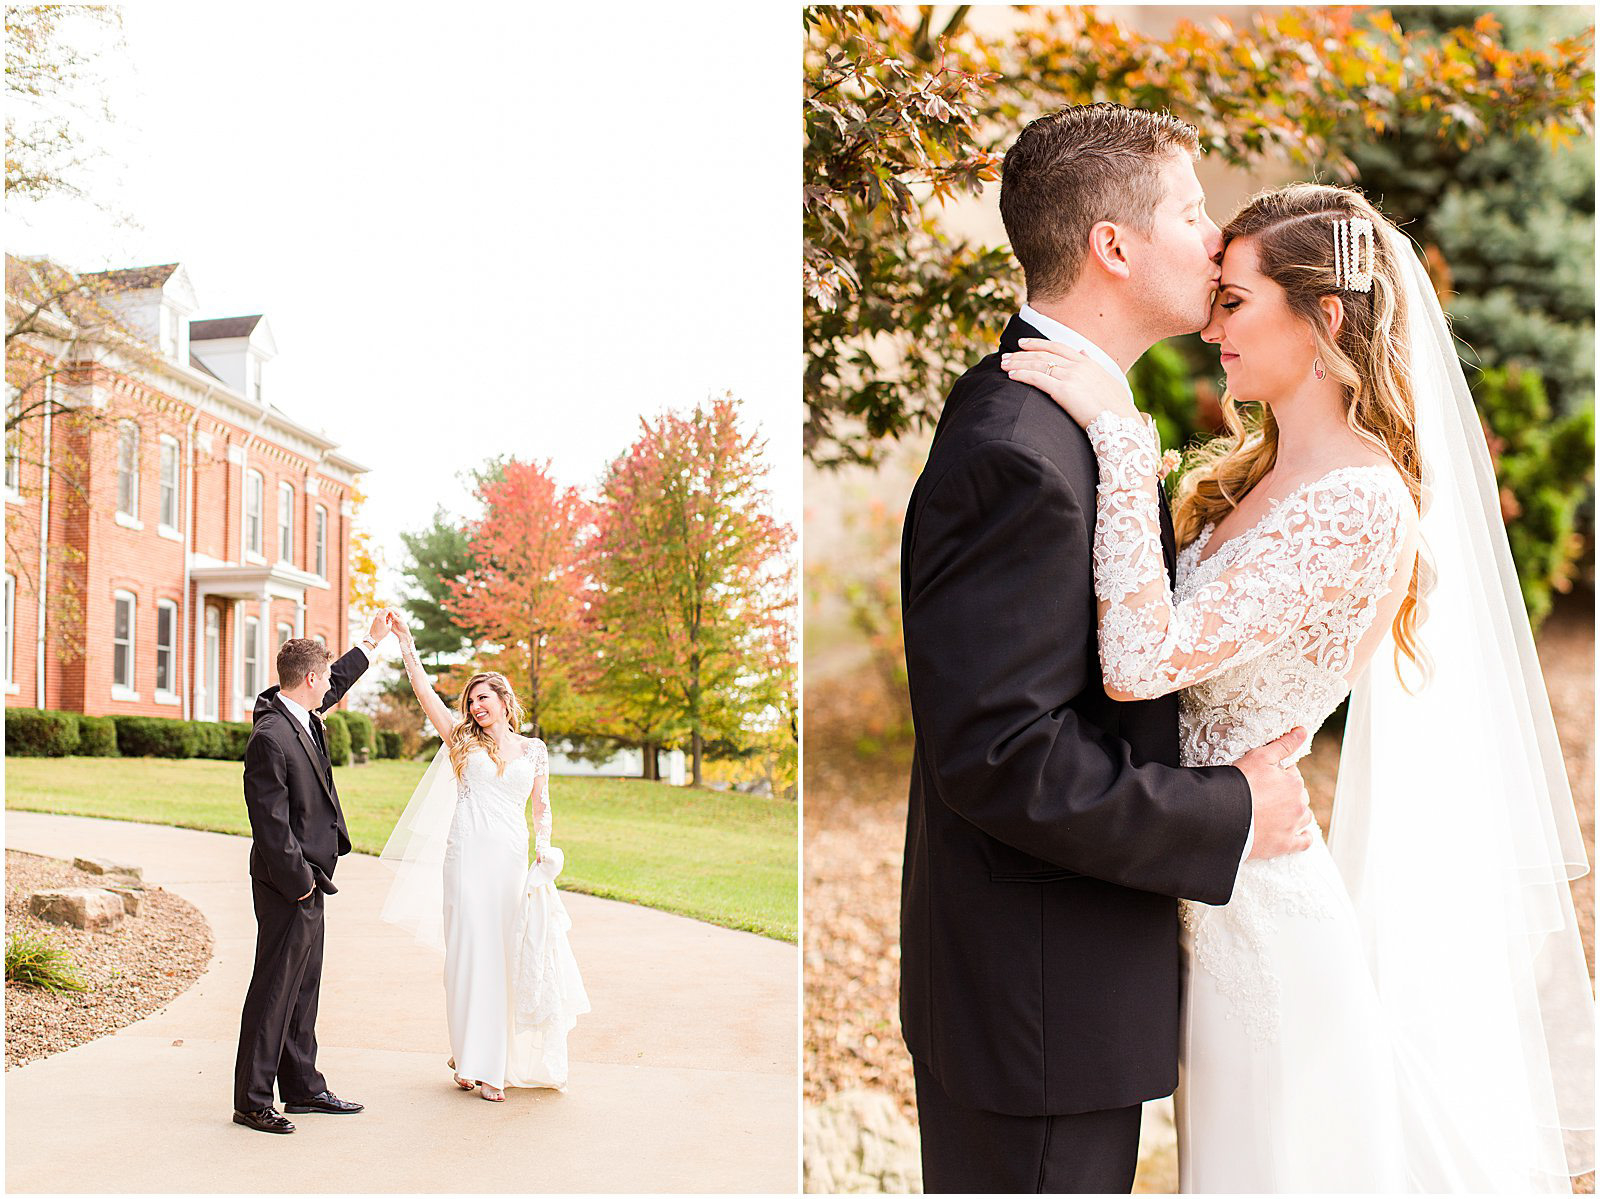 A Romantic Fall Wedding in Ferdinand, IN | Tori and Kyle | Bret and Brandie Photography 0121.jpg